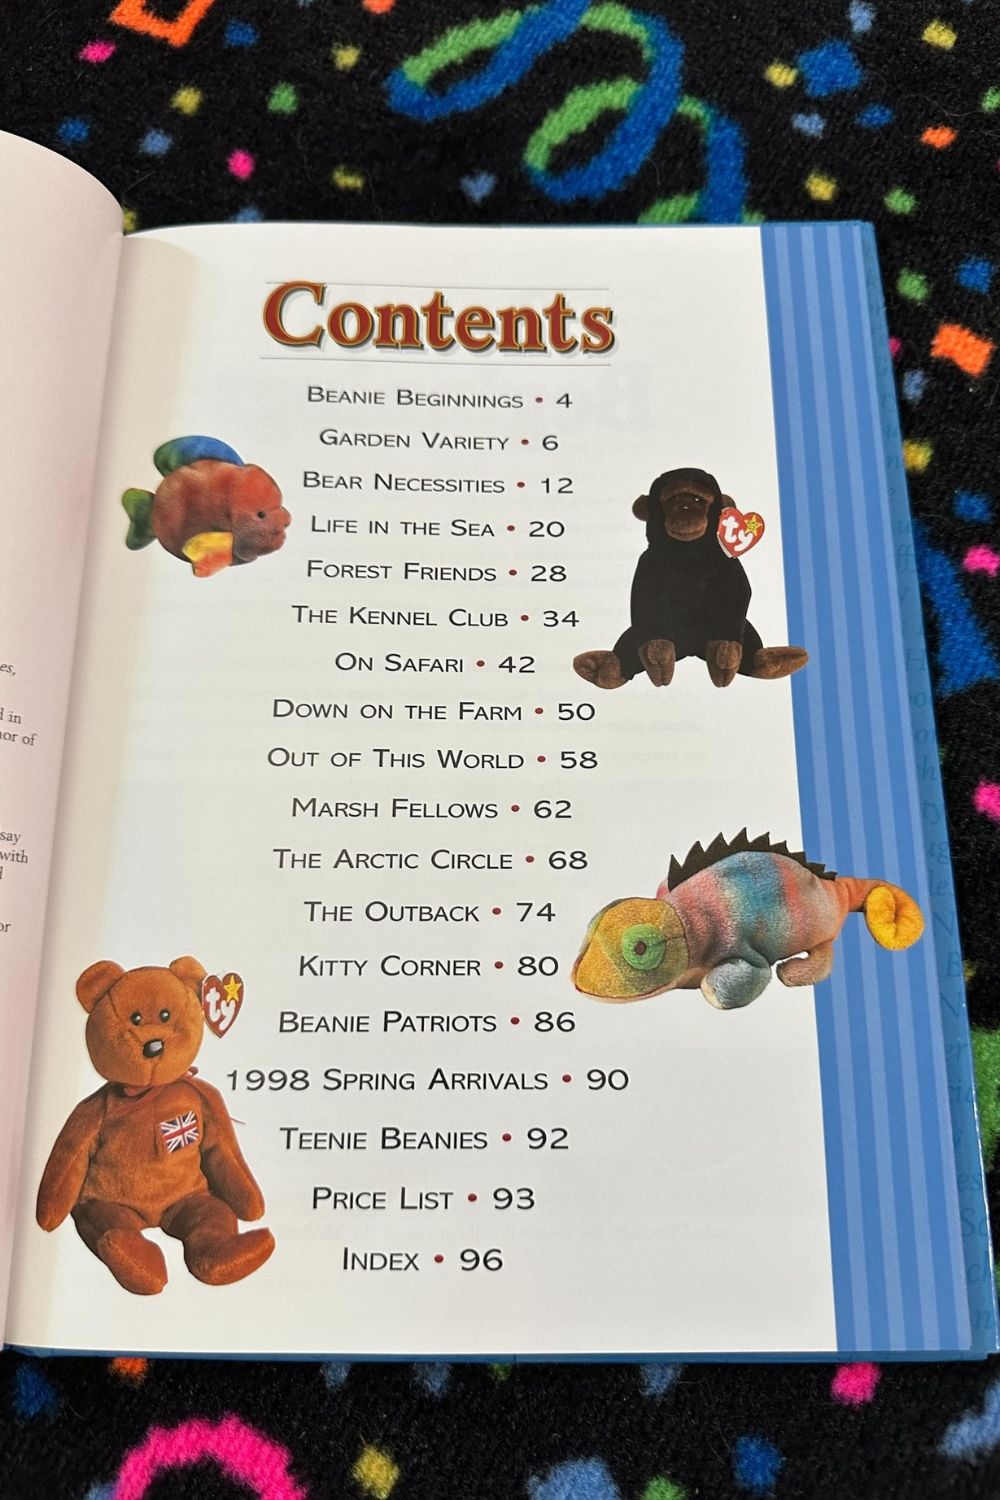 FOR THE LOVE OF BEANIE BABIES BOOK*